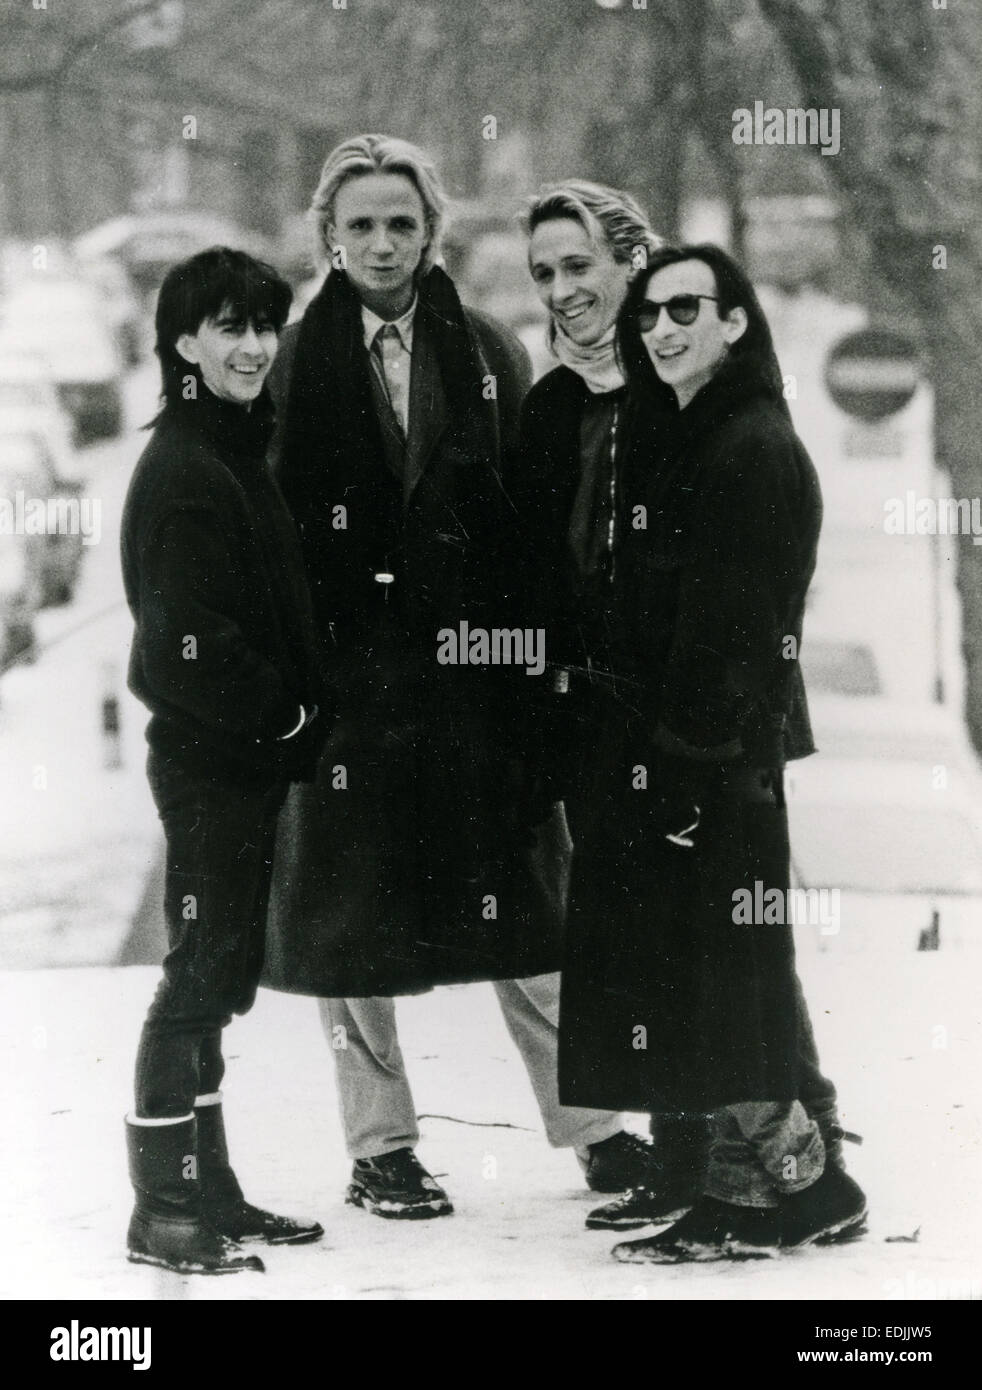 IMMACULATE FOOLS Promotional photo of English pop group in January 1985 Stock Photo